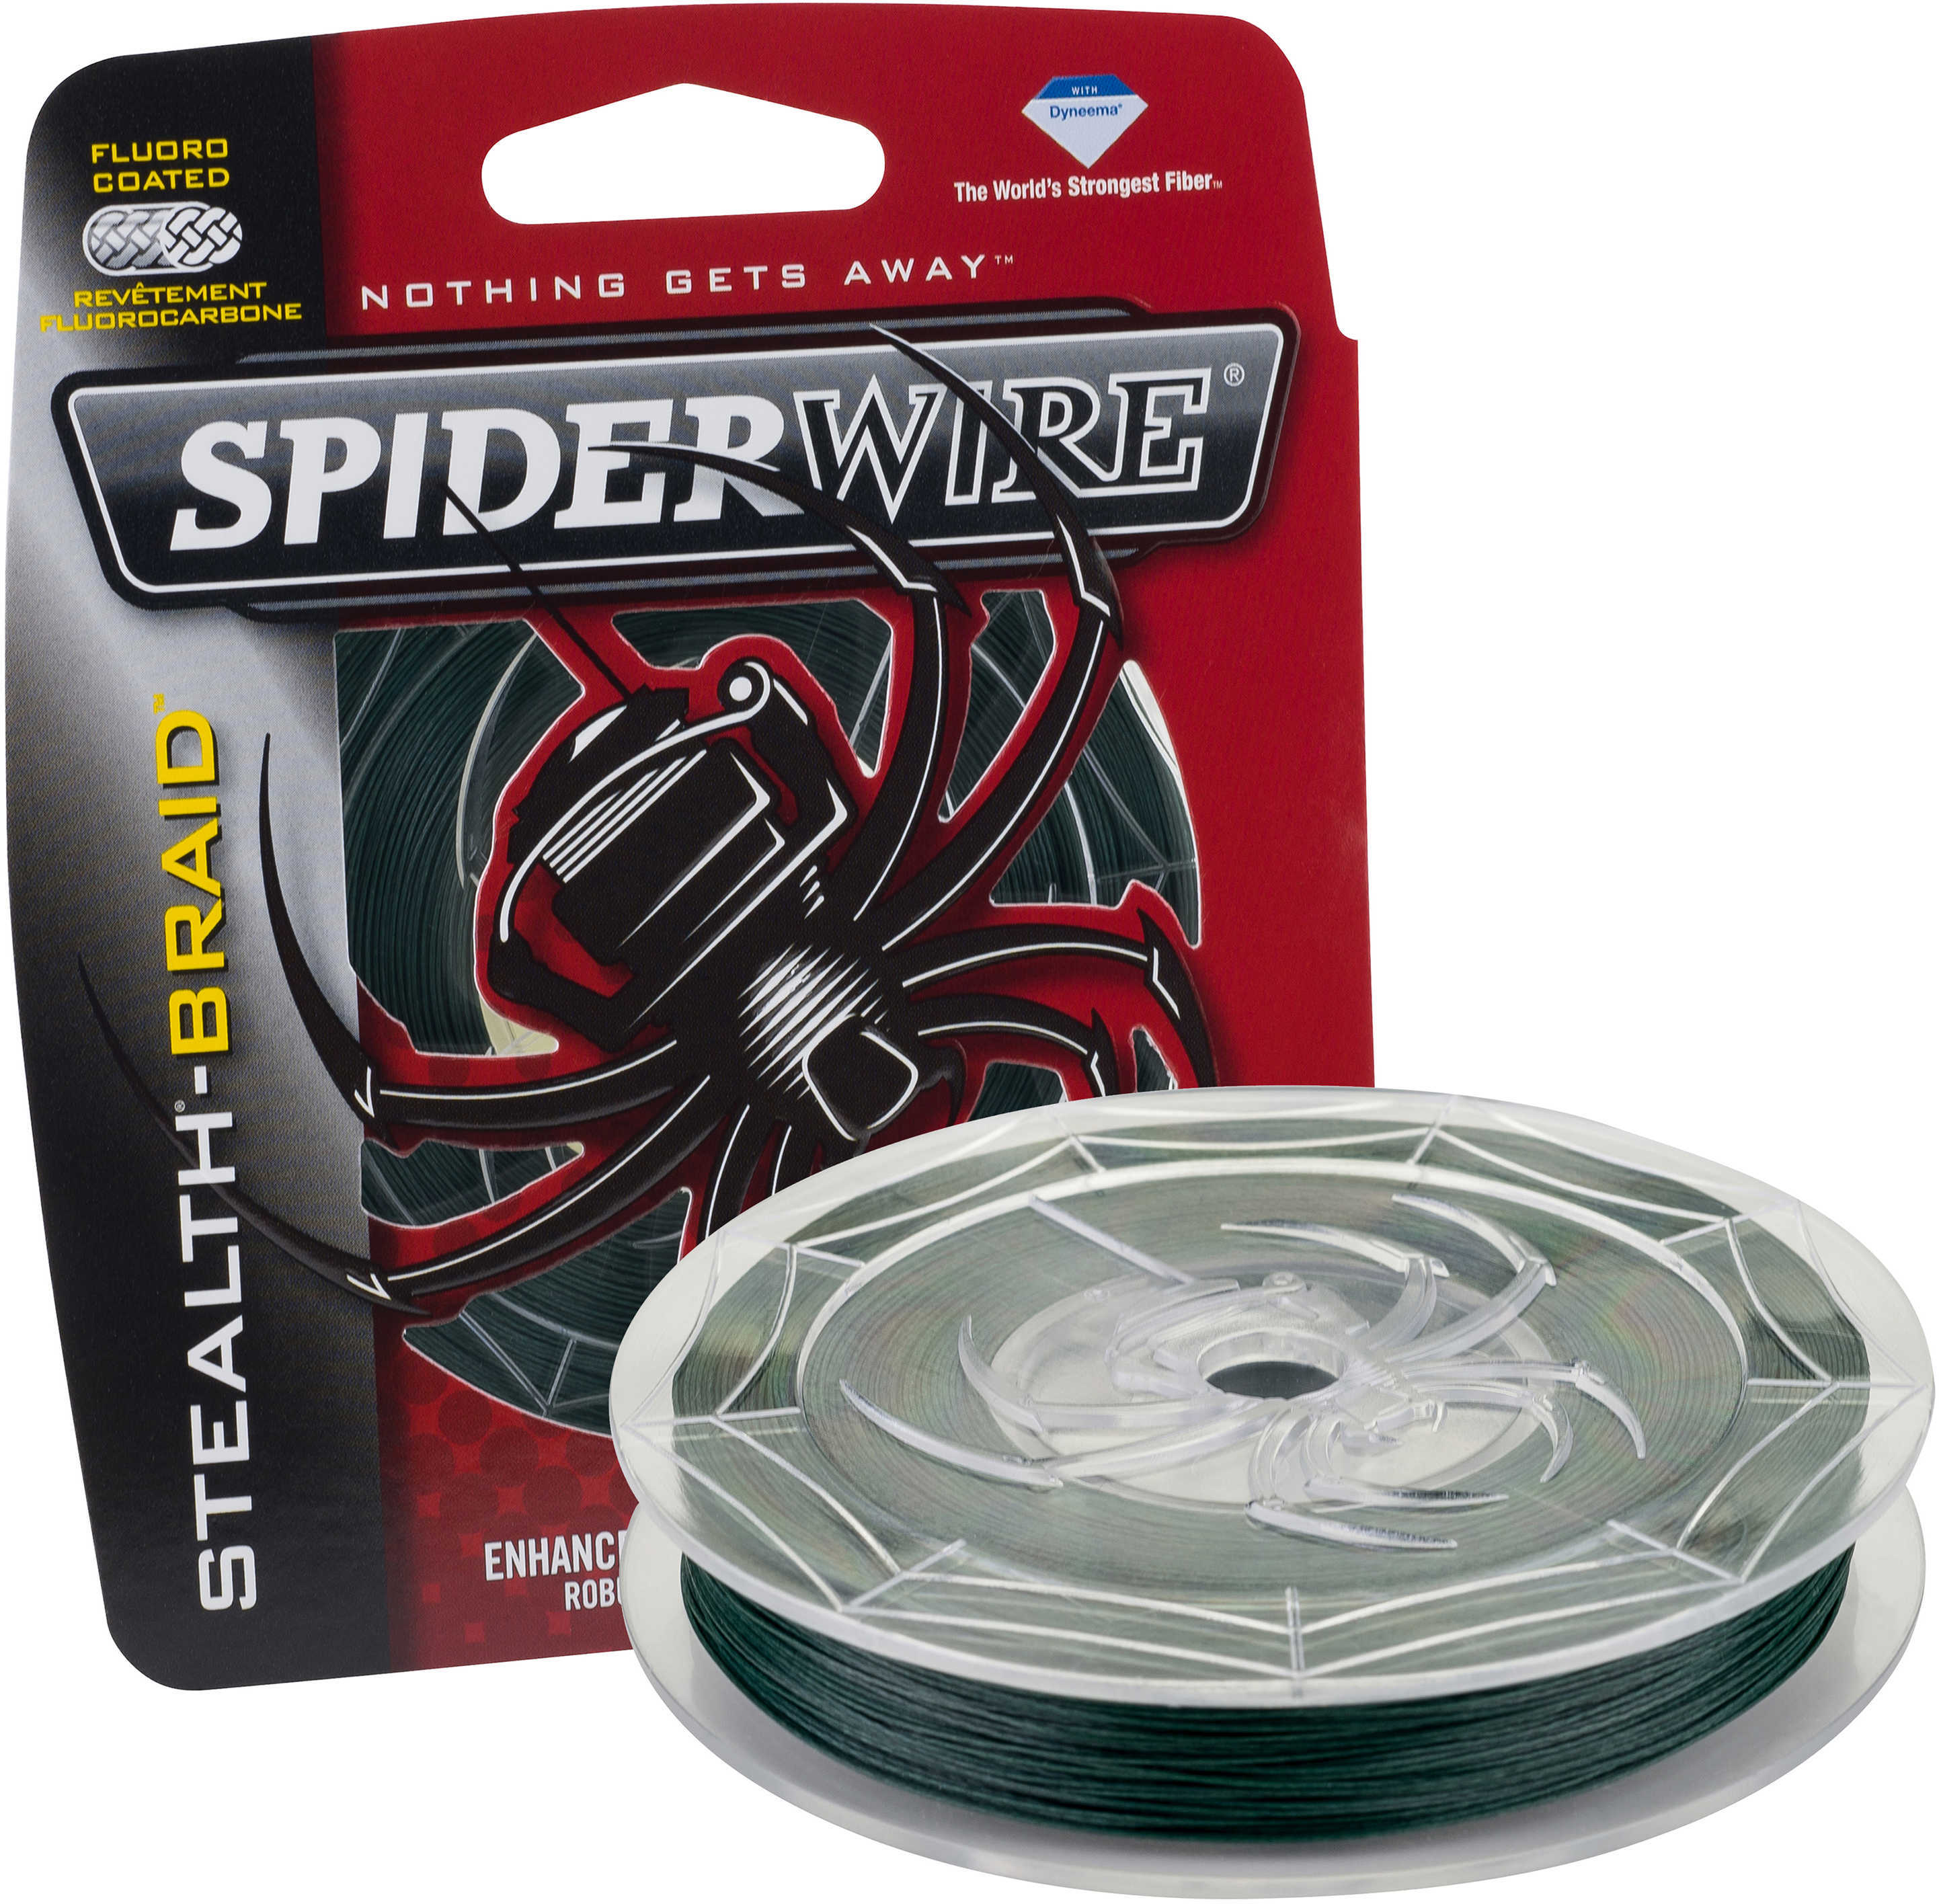 Spiderwire Stealth Braid 200 Yards , 10 lbs Strength, 0.008" Diameter, Moss Green Md: 1374597